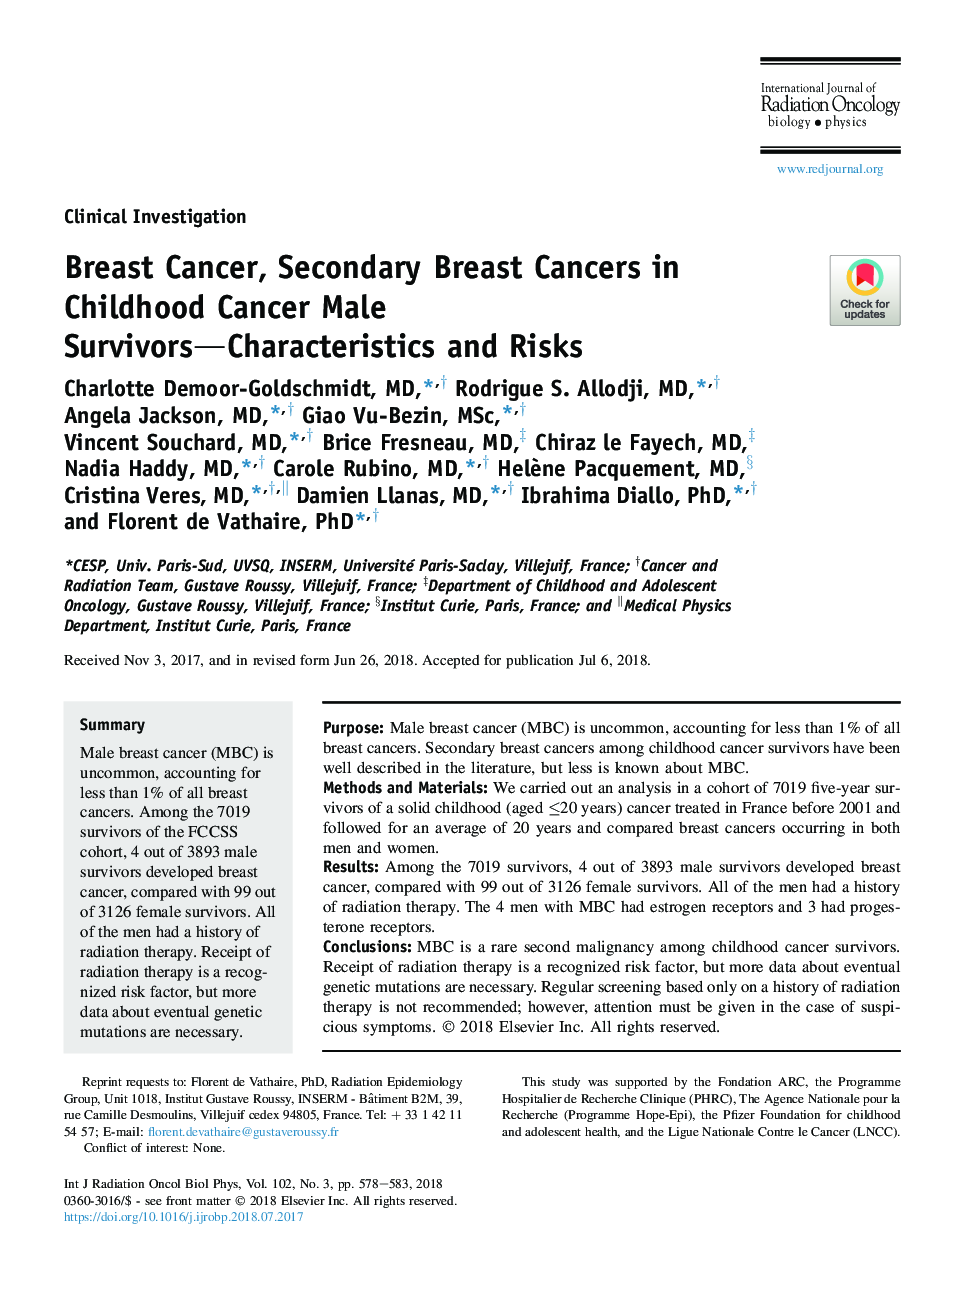 Breast Cancer, Secondary Breast Cancers in Childhood Cancer Male Survivors-Characteristics and Risks